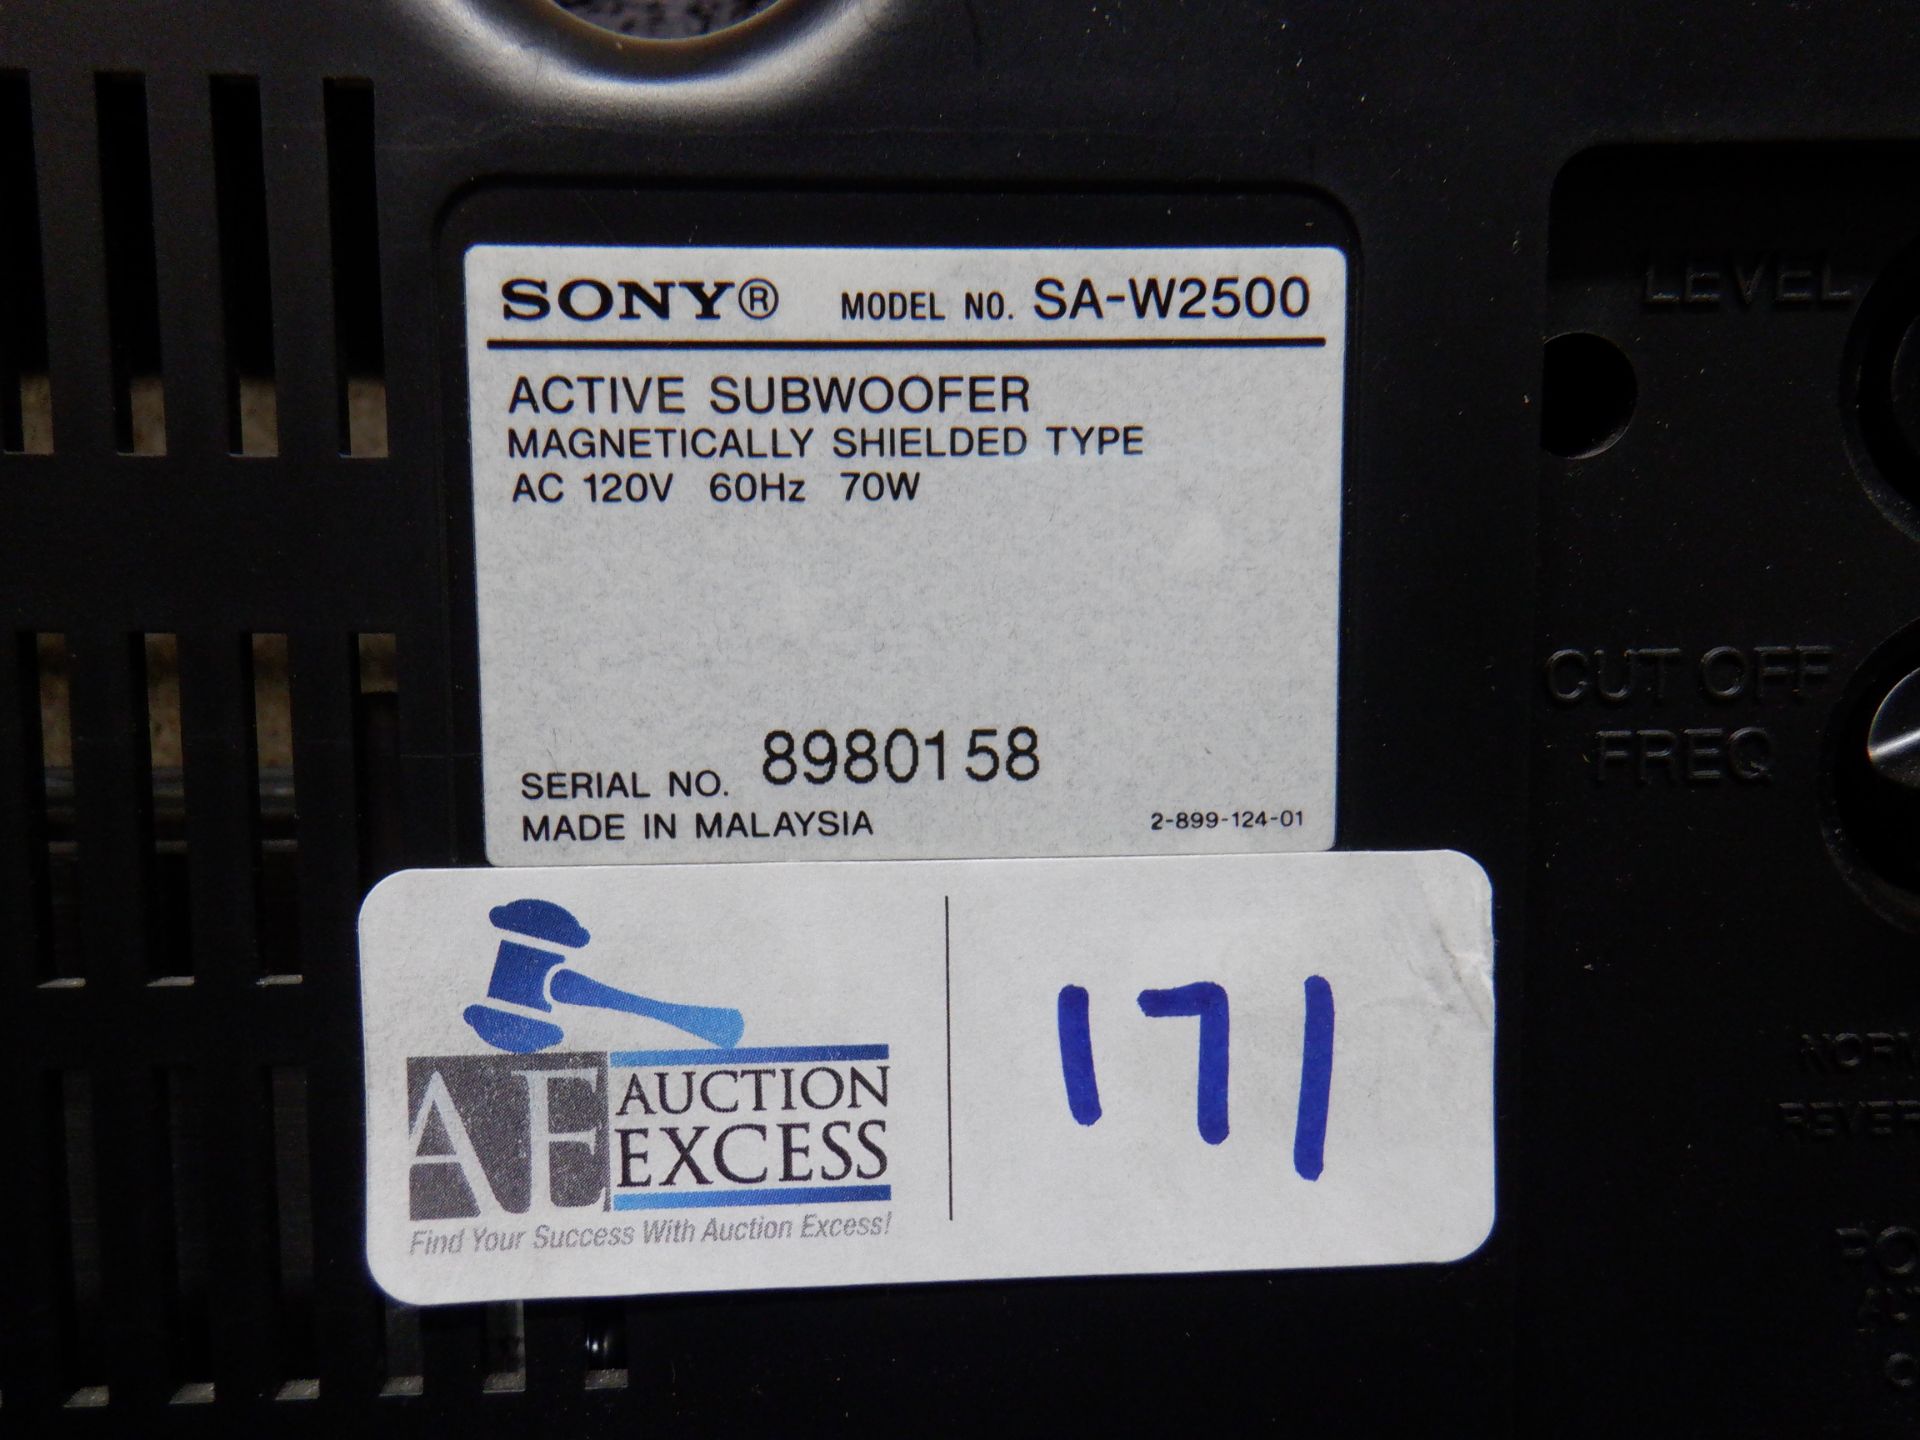 LOT OF 2 SONY ACTIVE SUBWOOFERS SA-W2500 - Image 3 of 4